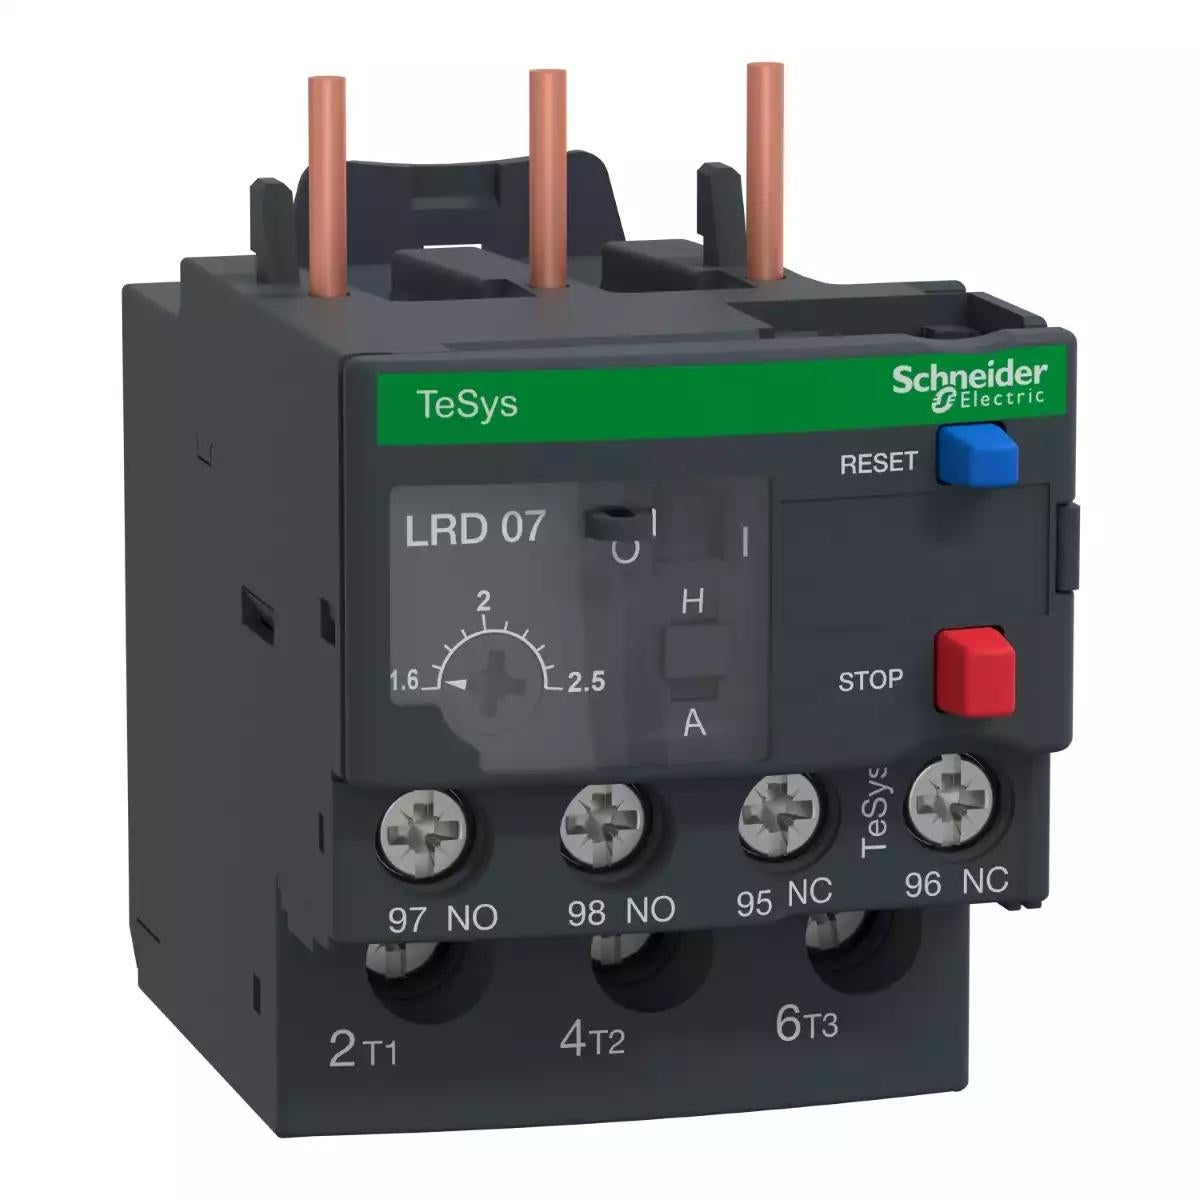 Thermal overload relay,TeSys Deca,1.6-2.5A,1NO+1NC,class 10A lugs ring terminal